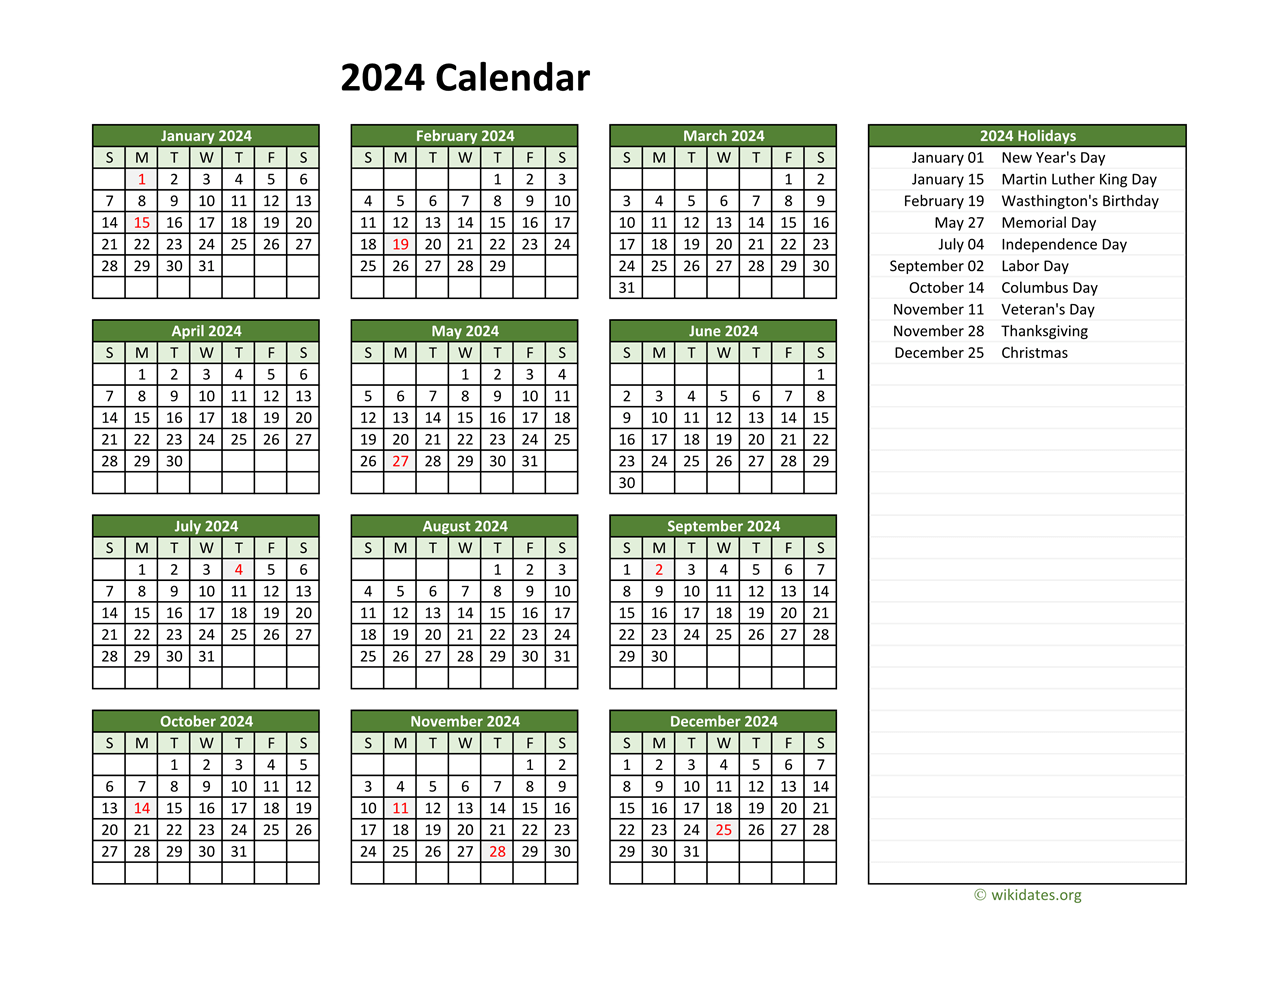 Printable 2024 Calendar with Federal Holidays | WikiDates.org